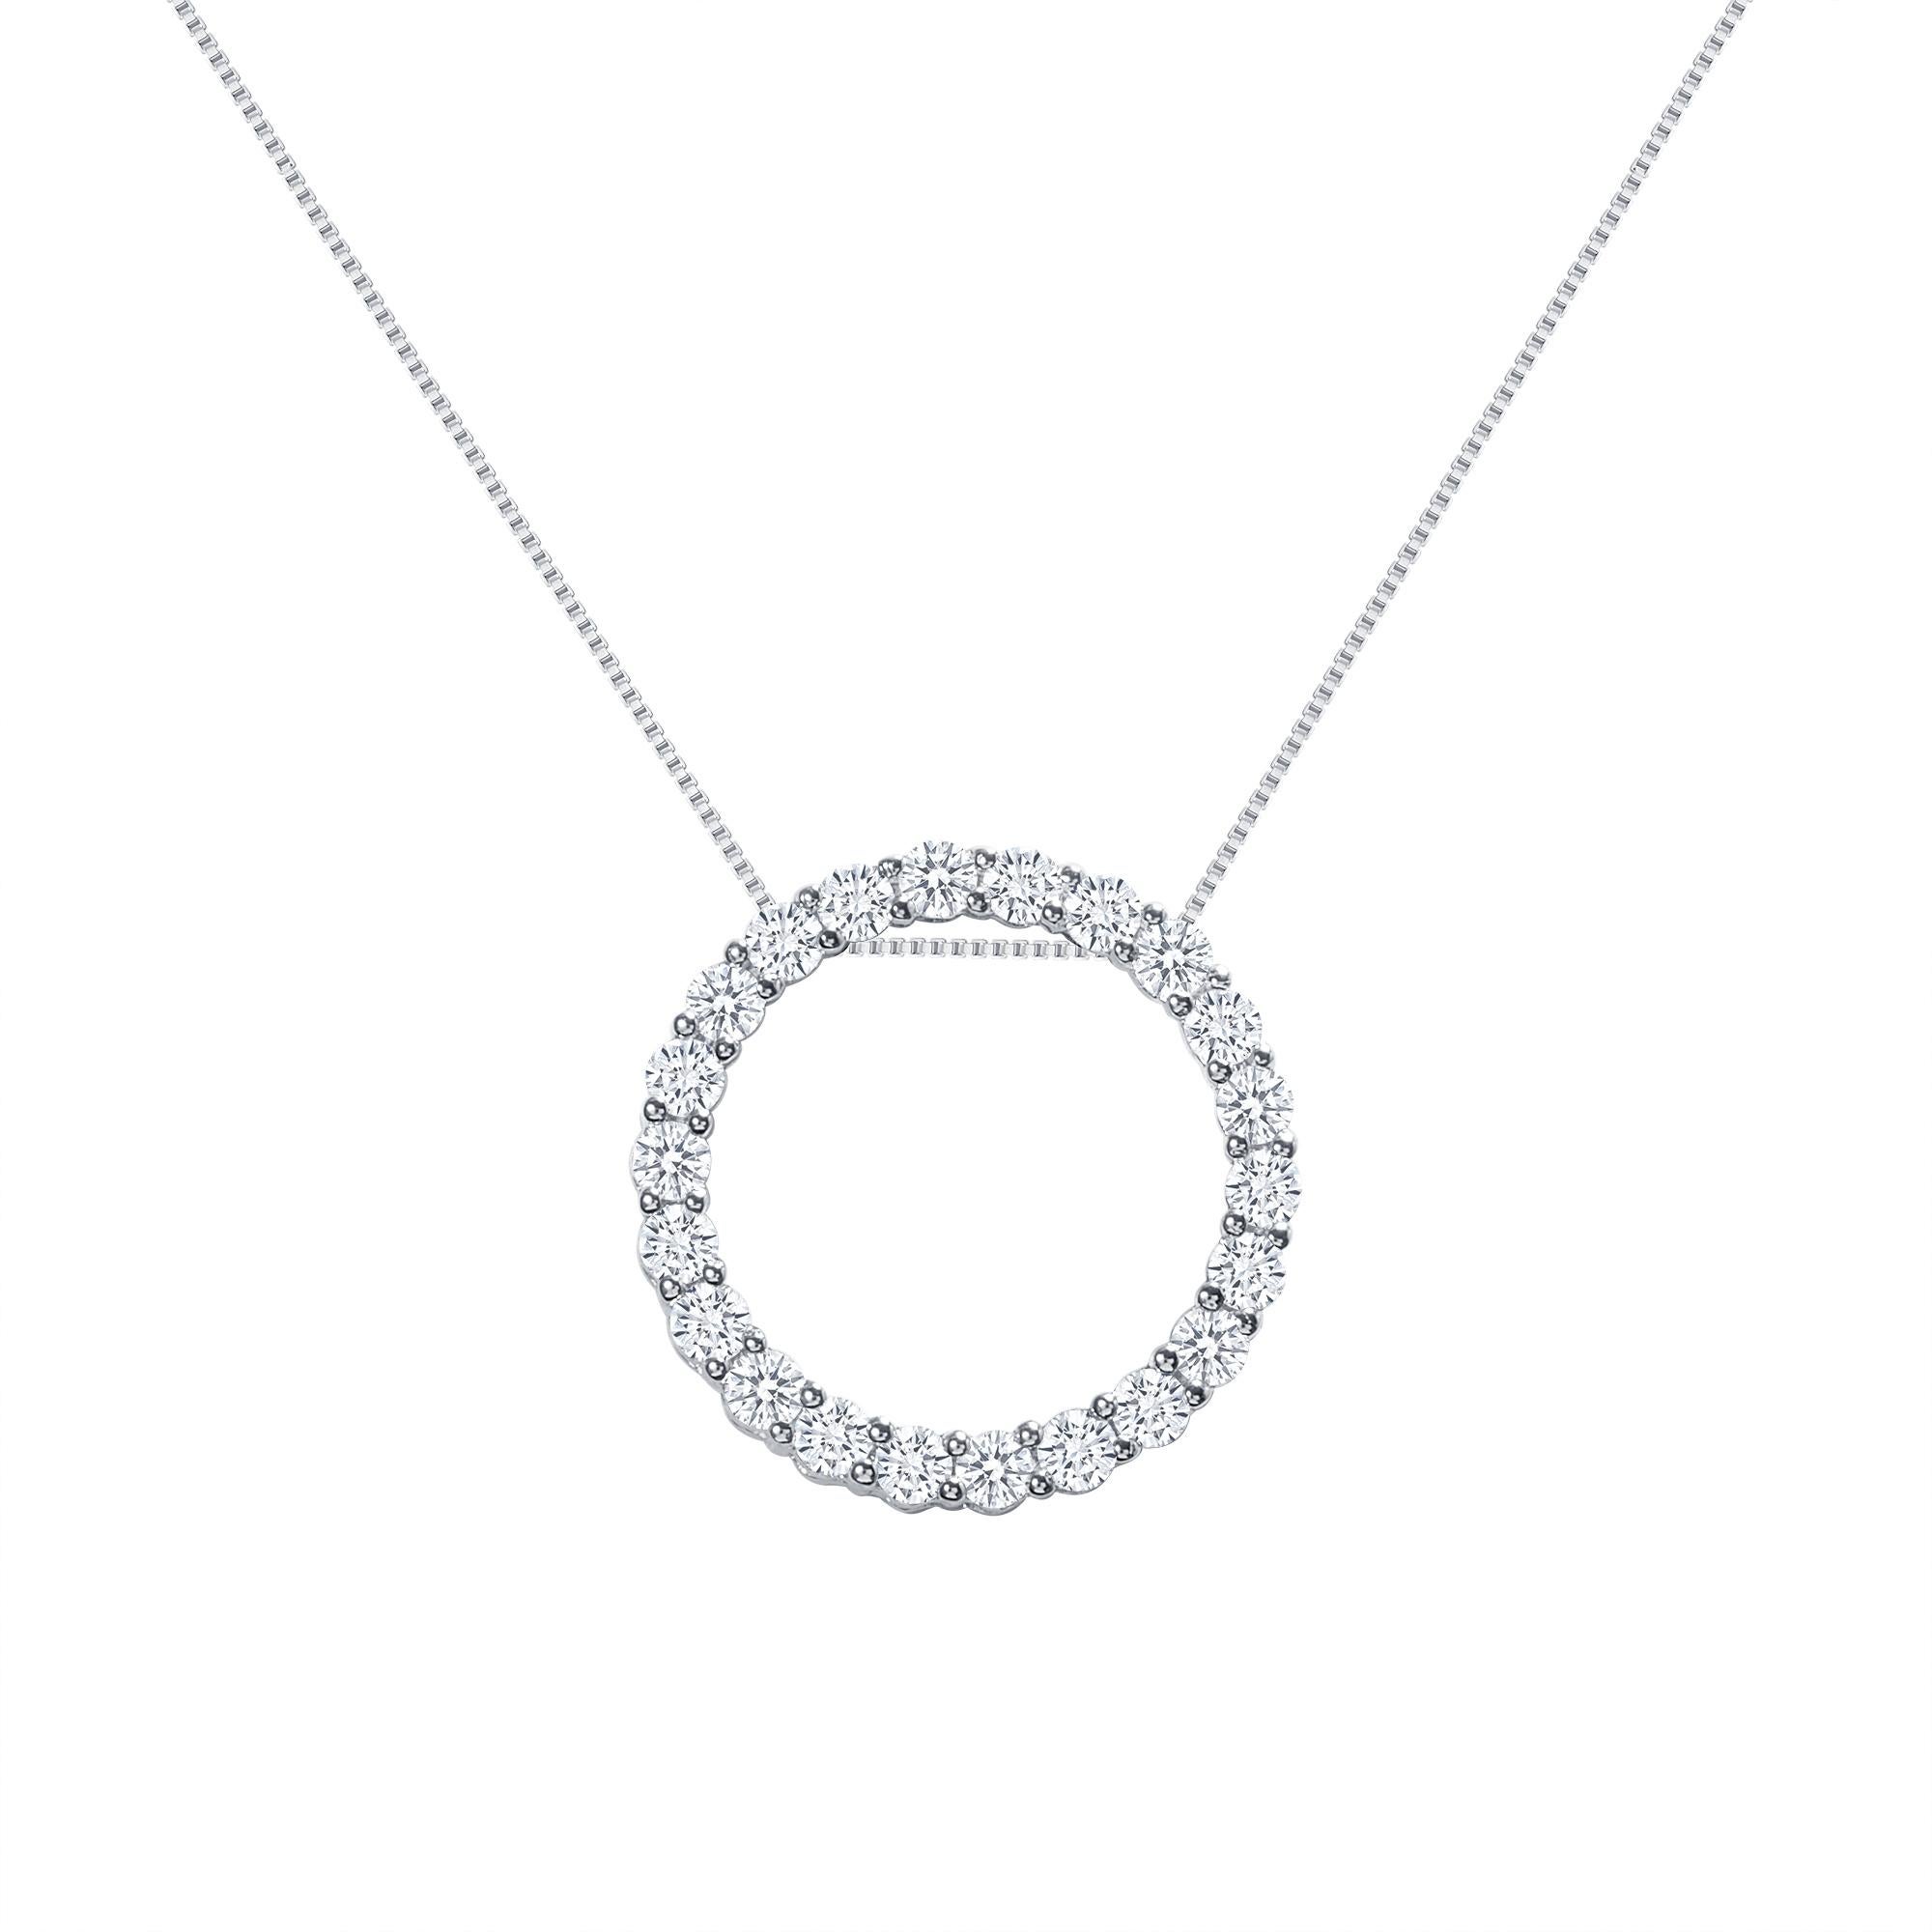 This diamond circle pendant provides a glowing chic look.
Metal: 14k Gold
Diamond Total Carats: 3 carat
Diamond Cut: Round Natural Diamonds (Not Lab Grown)
Diamond Clarity: VS
Diamond Color: F-G
Color: White Gold
Necklace Length: 20 inches